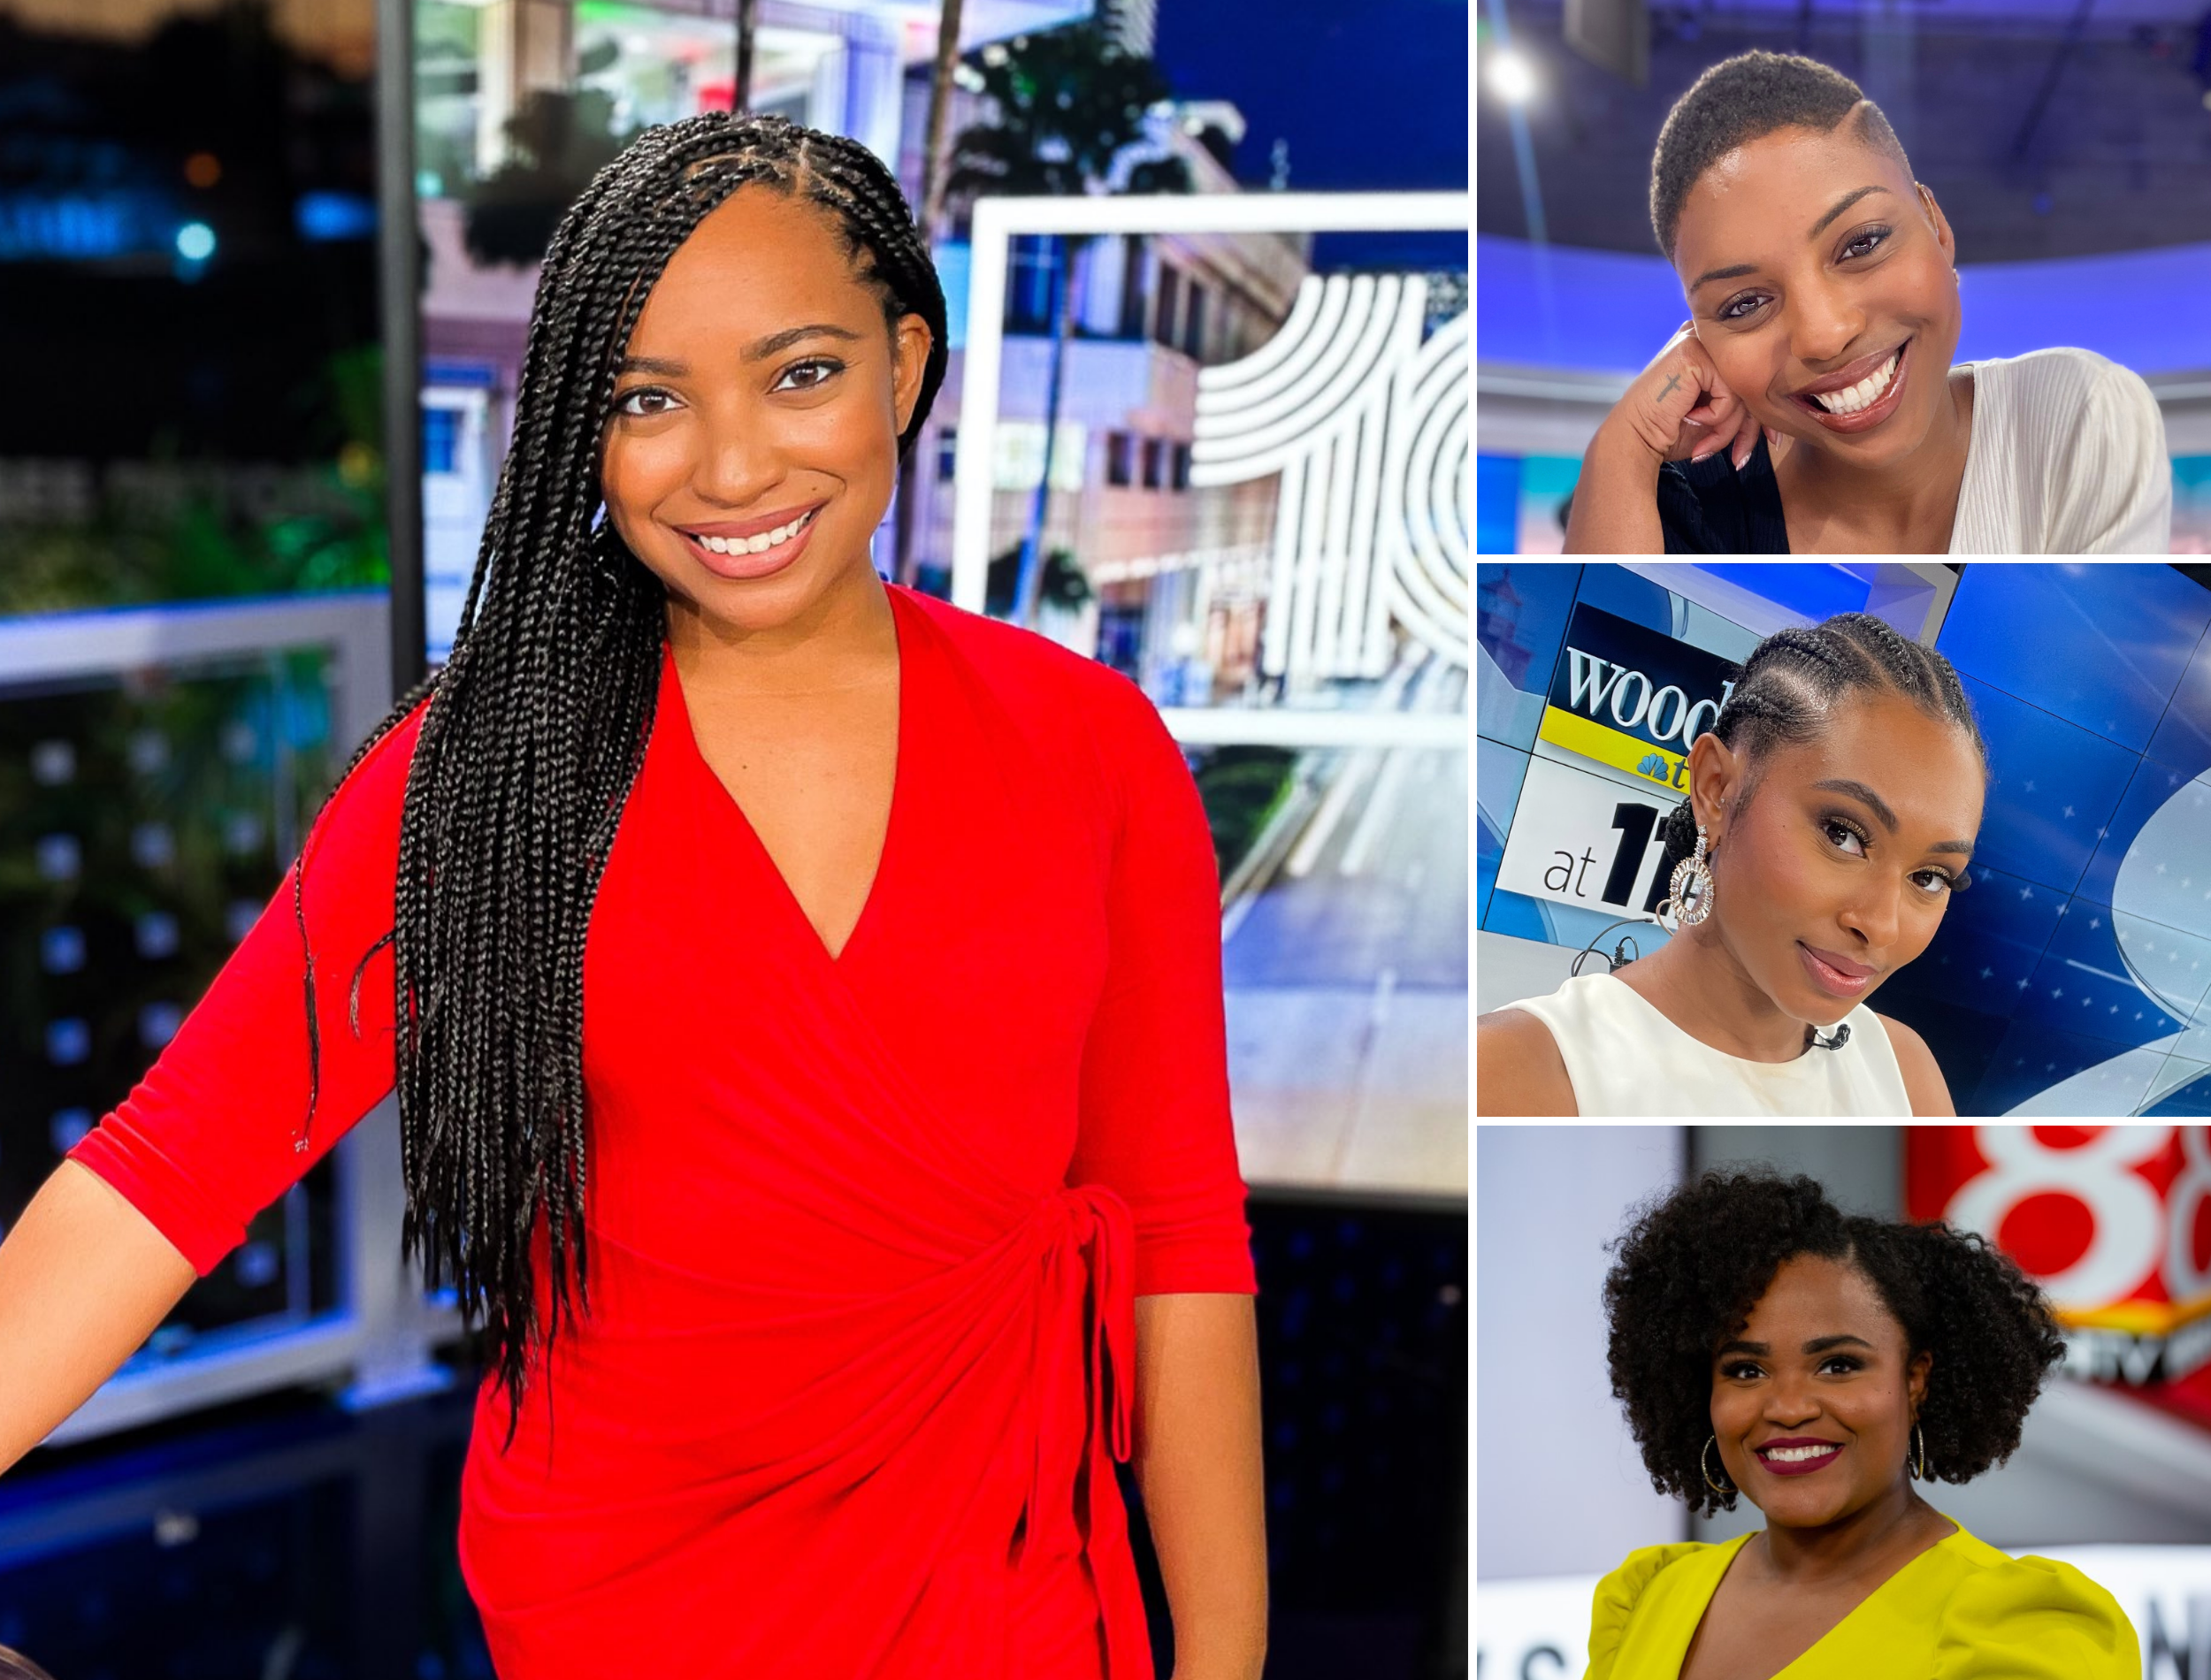 For Black women journalists, wearing #NaturalHairOnAir is a point of pride and resistance